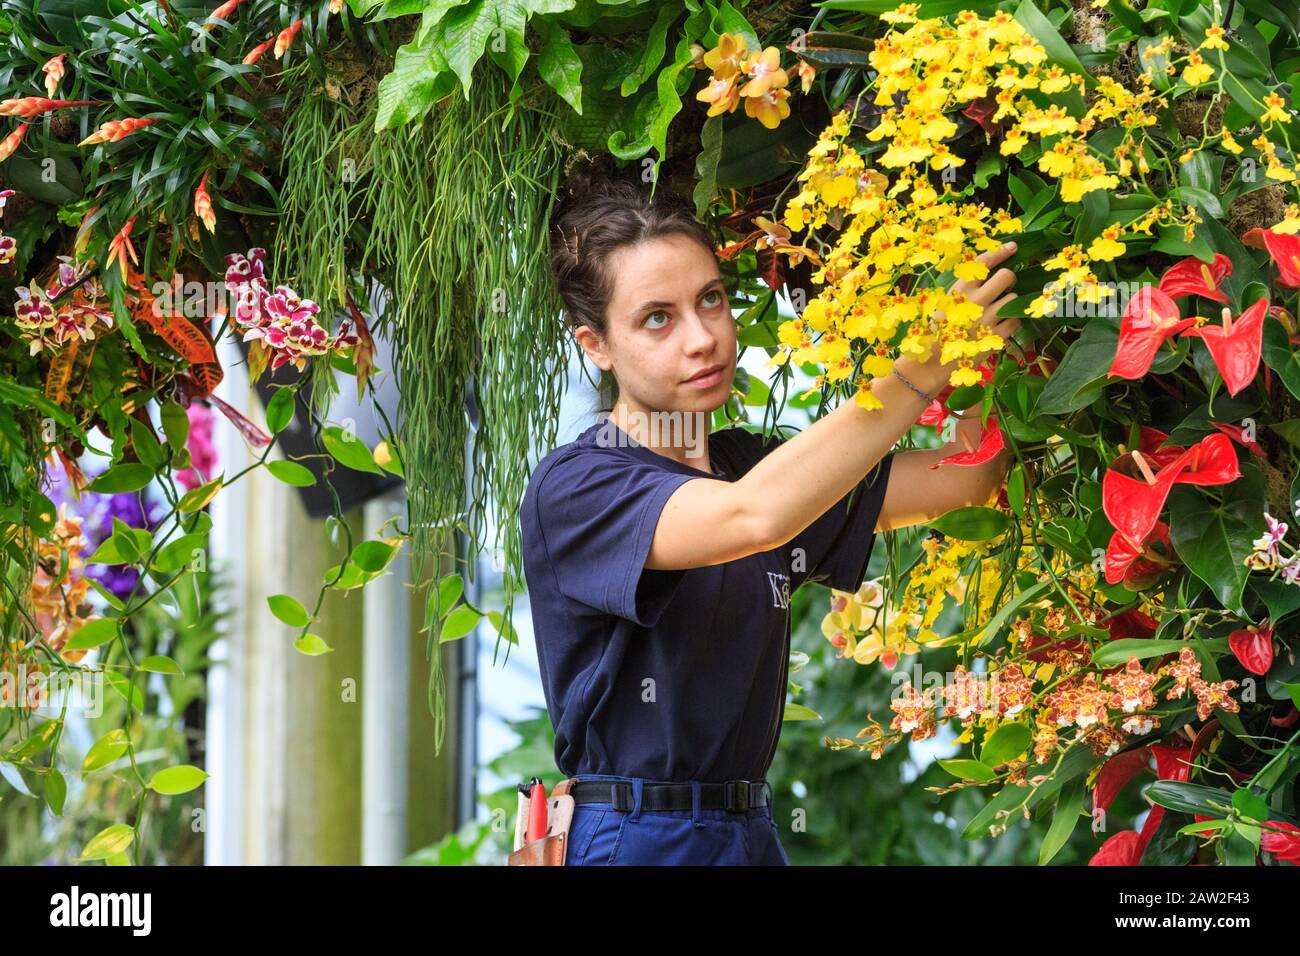 Kew Gardens, London, 06th Feb 2020. Kew apprentice Alice McKeever carefully tends to the delicate flowers. The annual Kew Orchid Festival at Royal Botanical Gardens in Kew is this year themed around the wonders of Indonesia. The dazzling display showcases Indonesia's plant diversity and wildlife at the Princess of Wales Conservatory. It will be open to the public 8th February - 8th March, 2020. Stock Photo